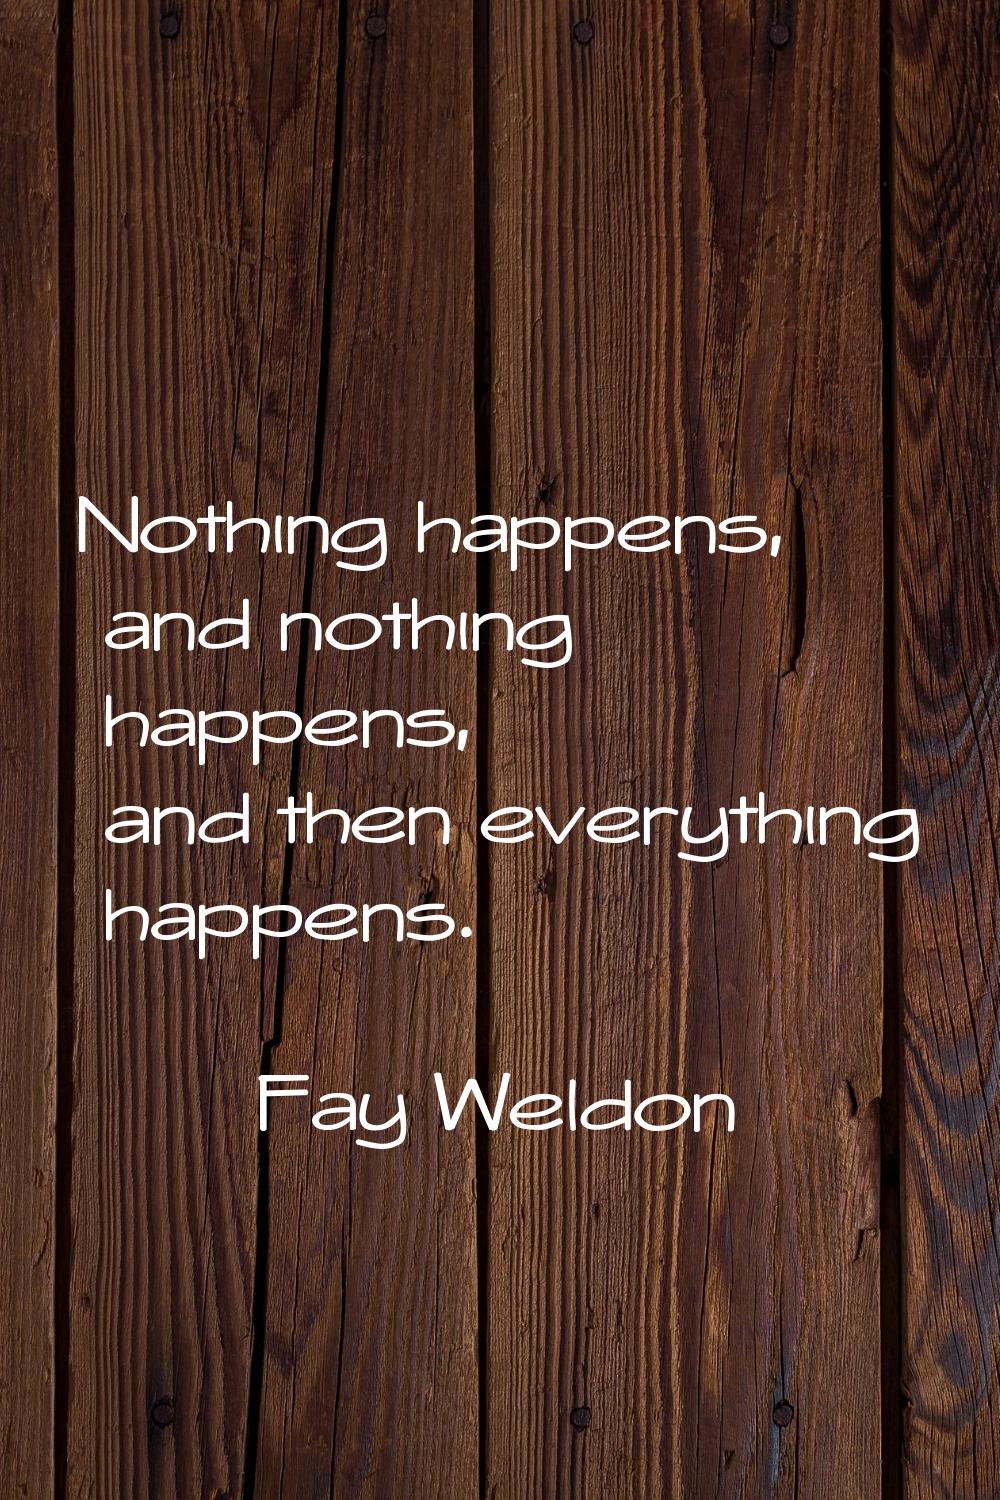 Nothing happens, and nothing happens, and then everything happens.